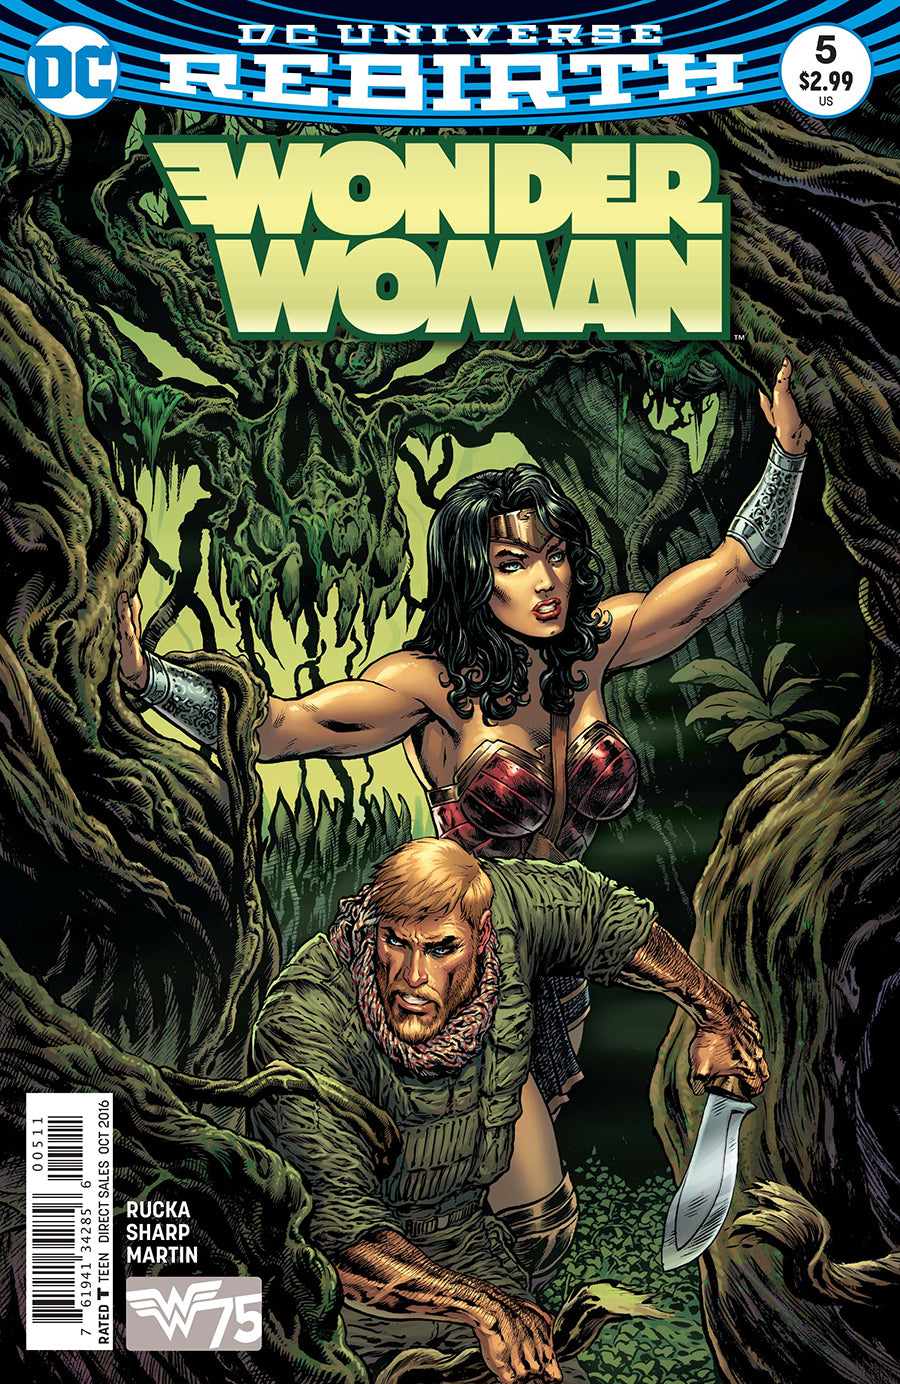 WONDER WOMAN #5 | Game Master's Emporium (The New GME)